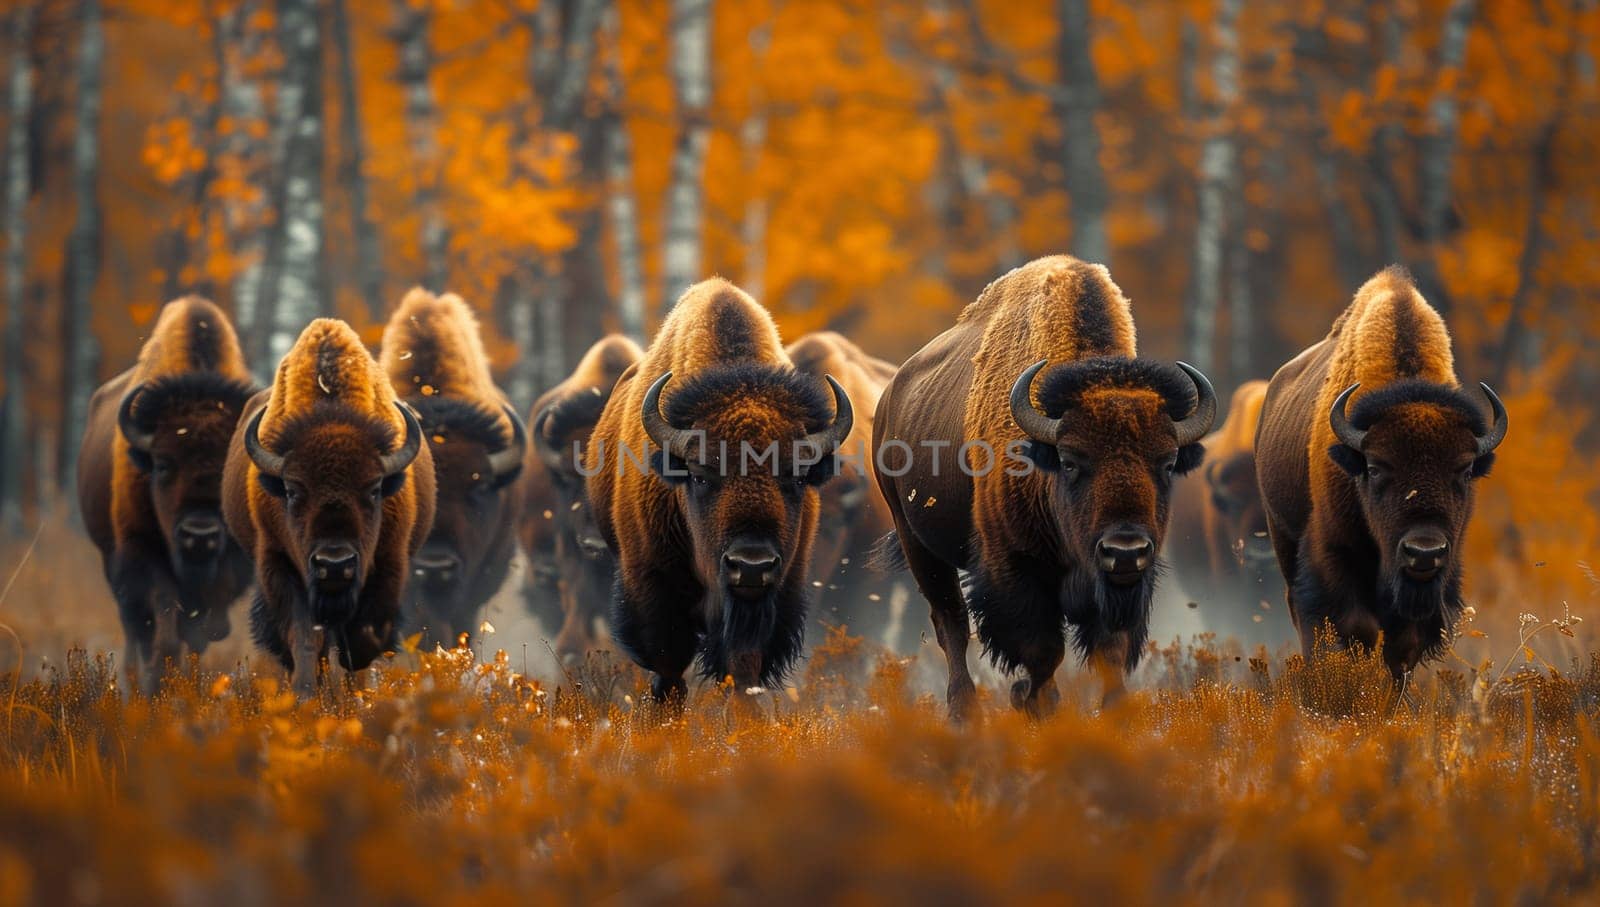 A group of bison, including bulls and calves, roaming in a grassy meadow within a woodland ecoregion. These terrestrial animals with strong snouts graze peacefully in their natural landscape